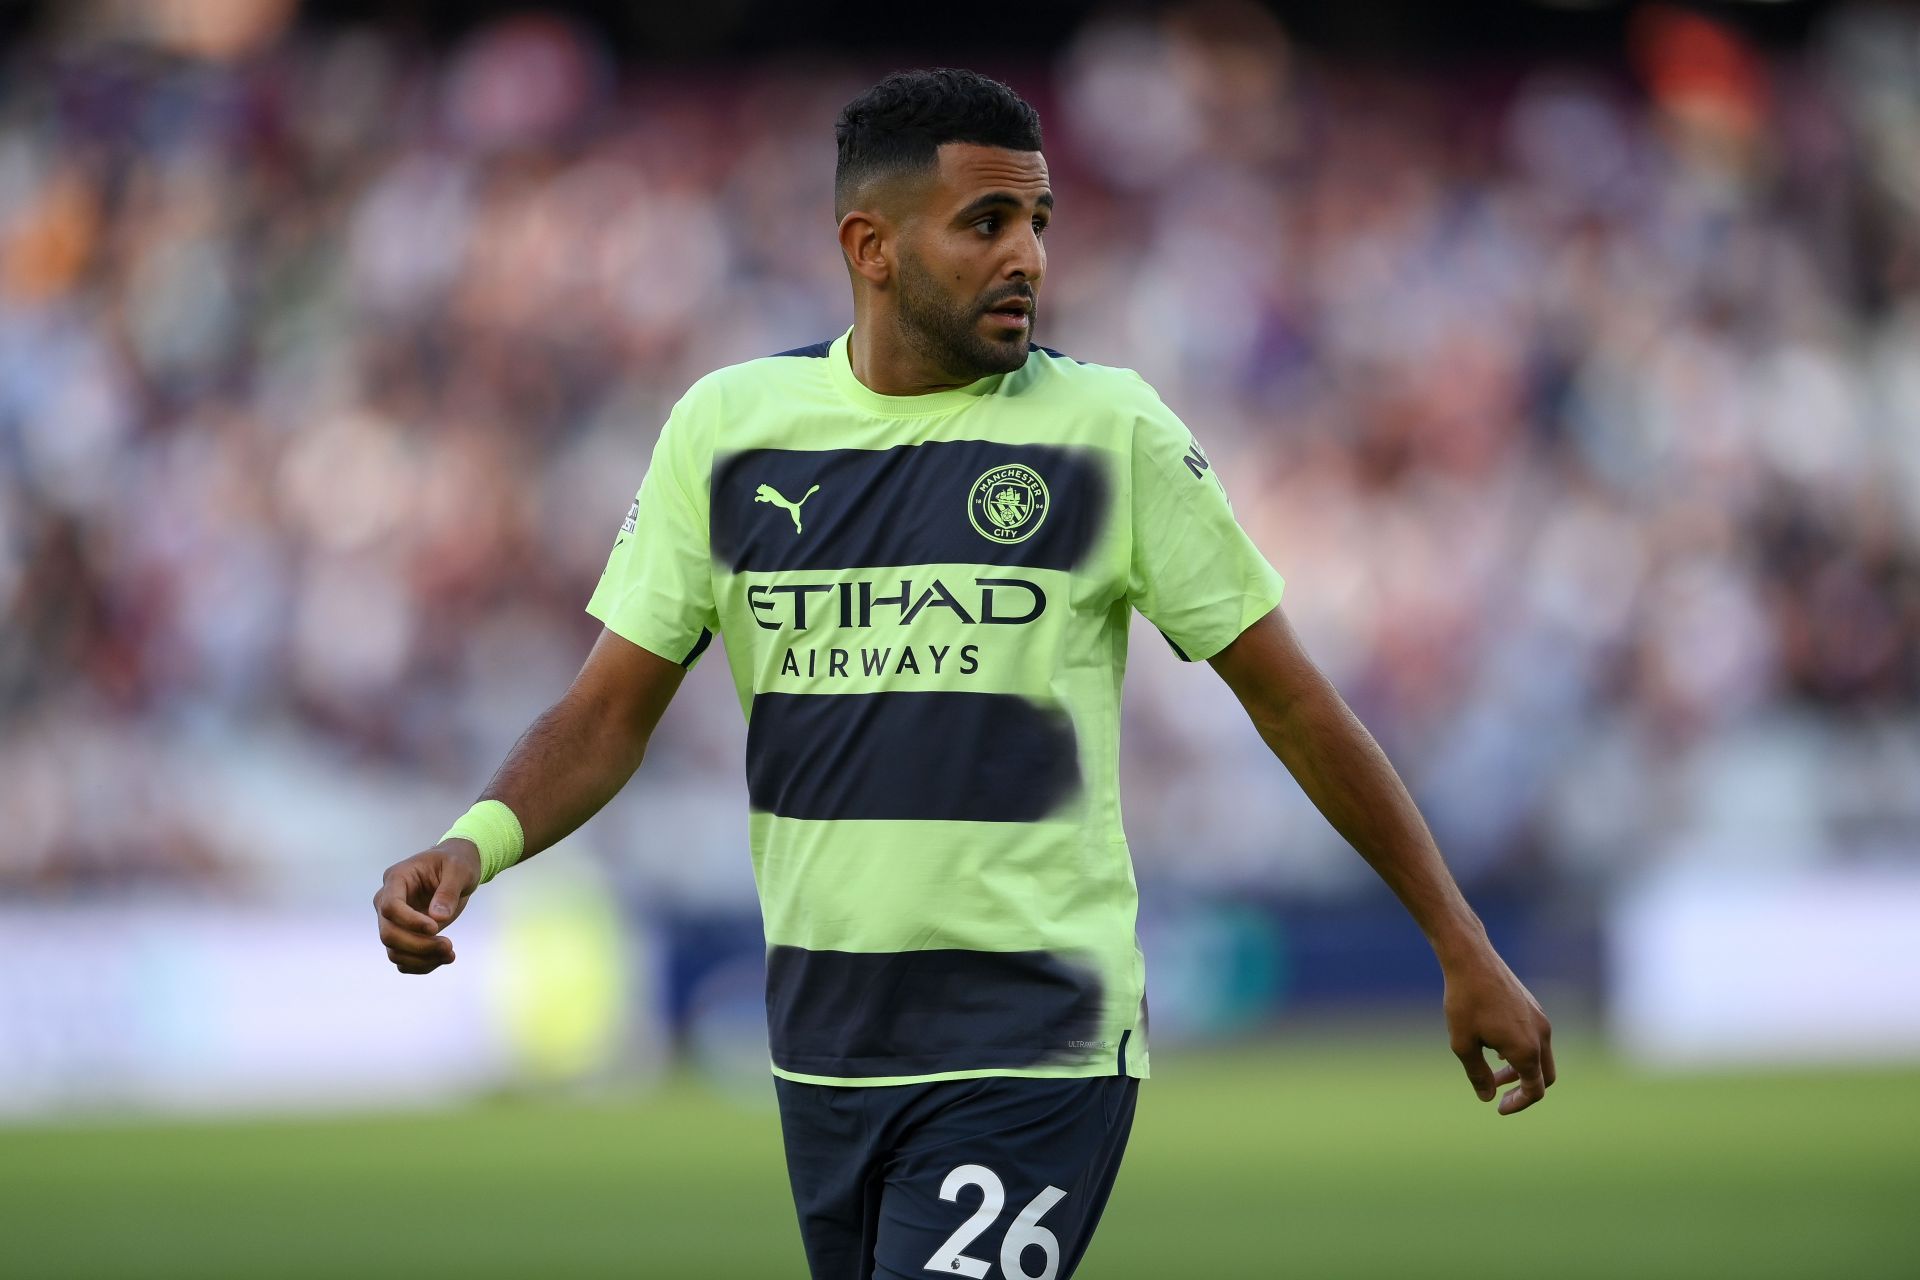 Mahrez is yet to score for Manchester City this season